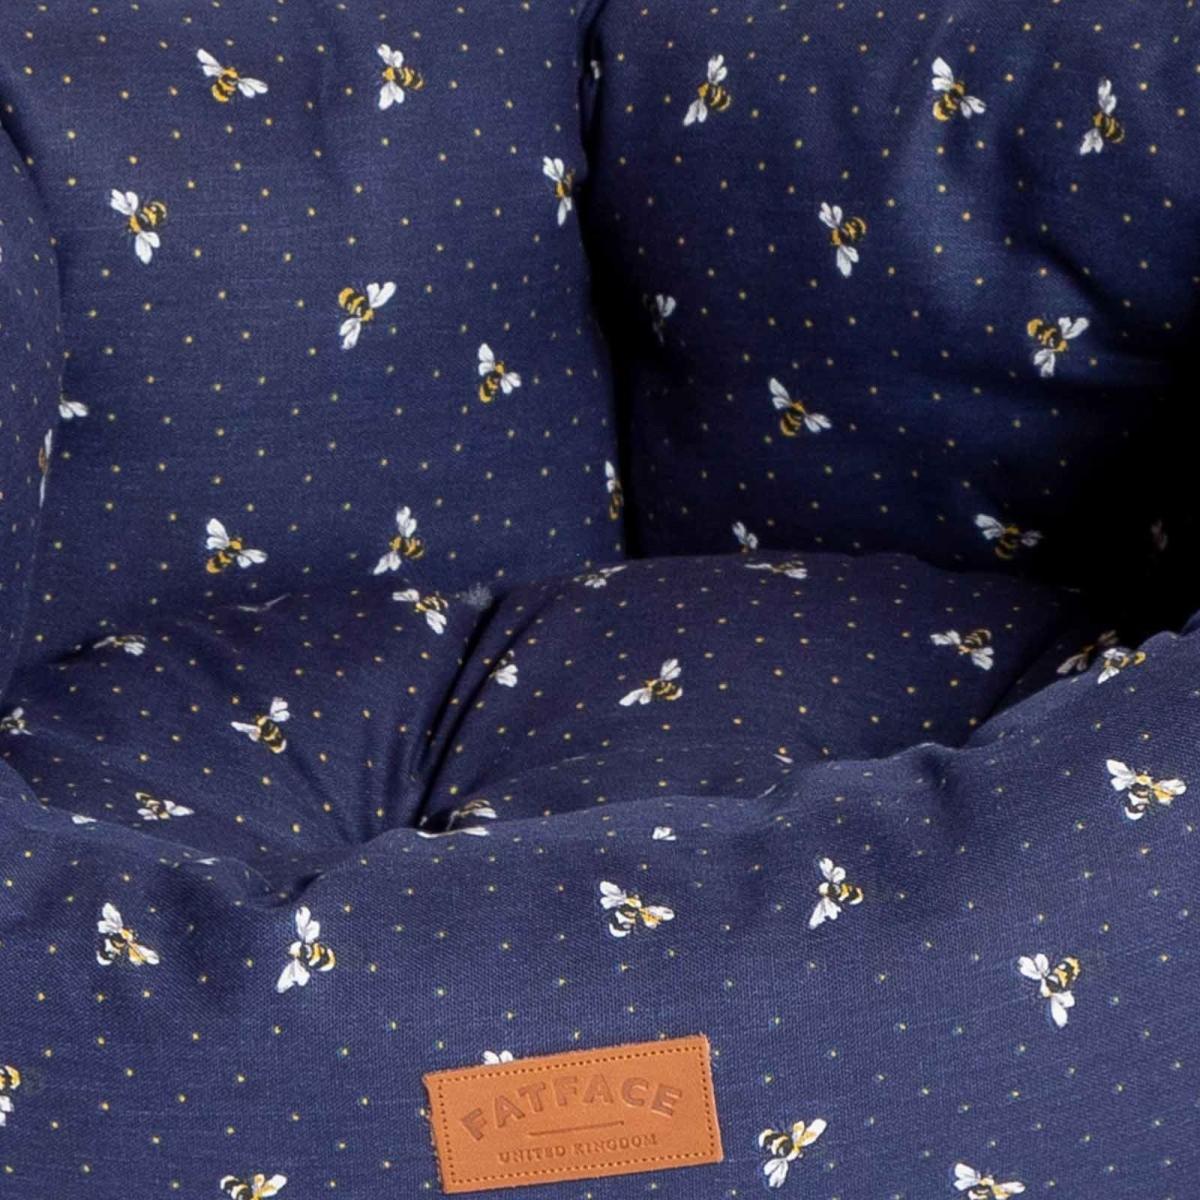 Fatface Spotty Bees Deluxe Slumber Bed